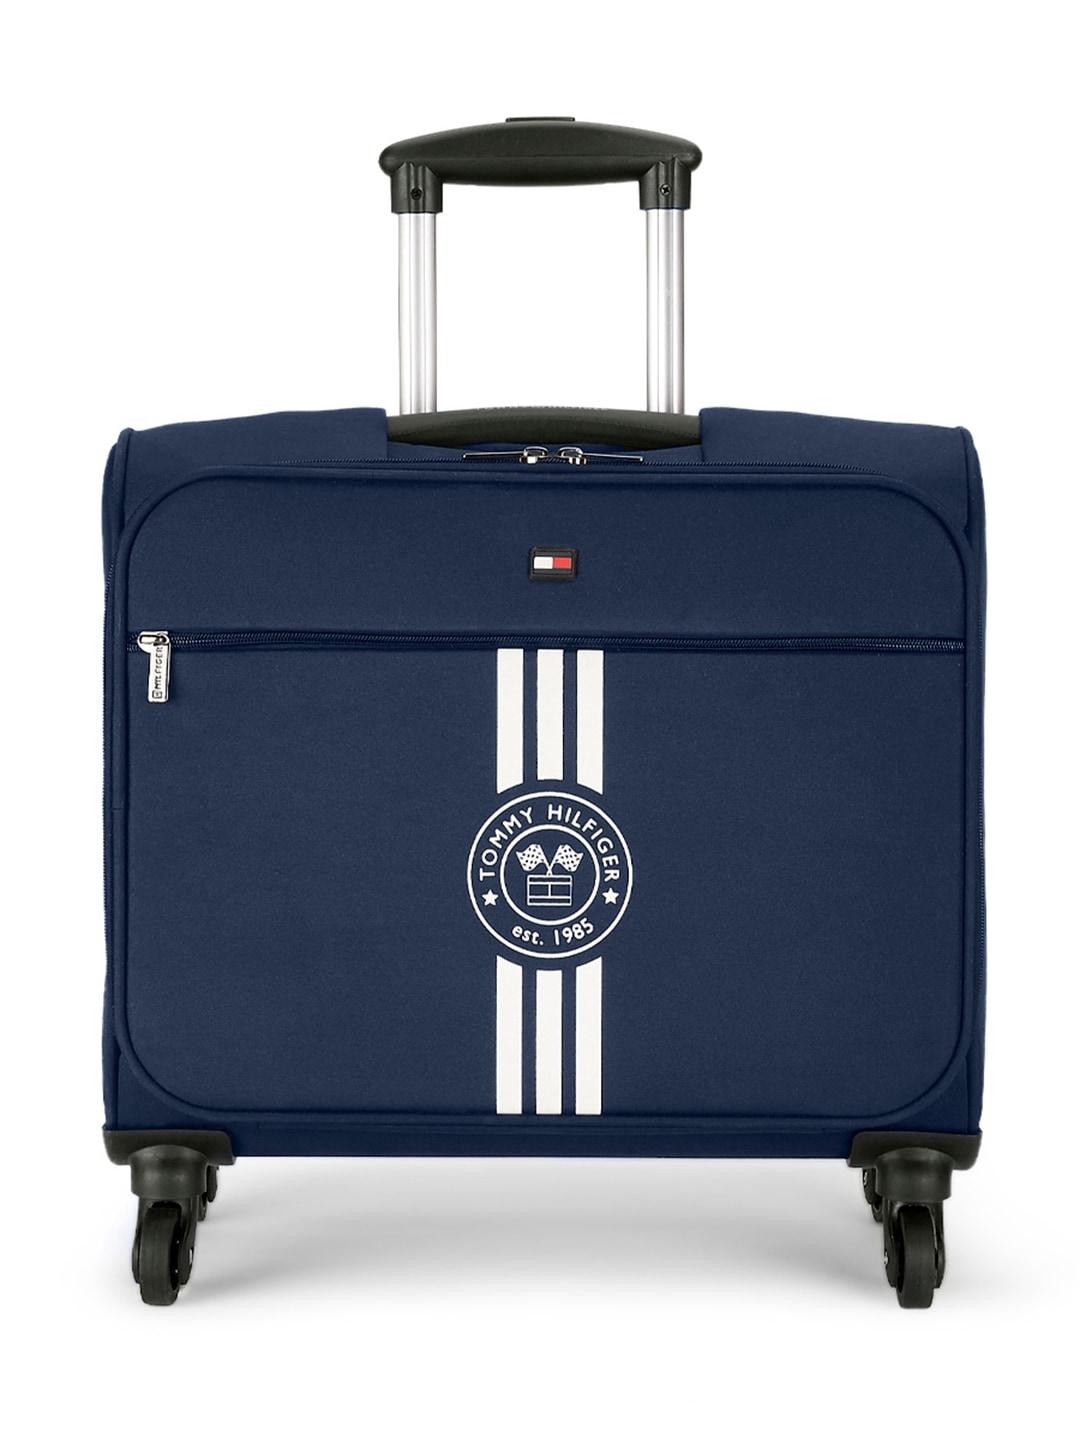 Tommy Hilfiger Striped 15 Inch Laptop Overnighter - 45 Litres